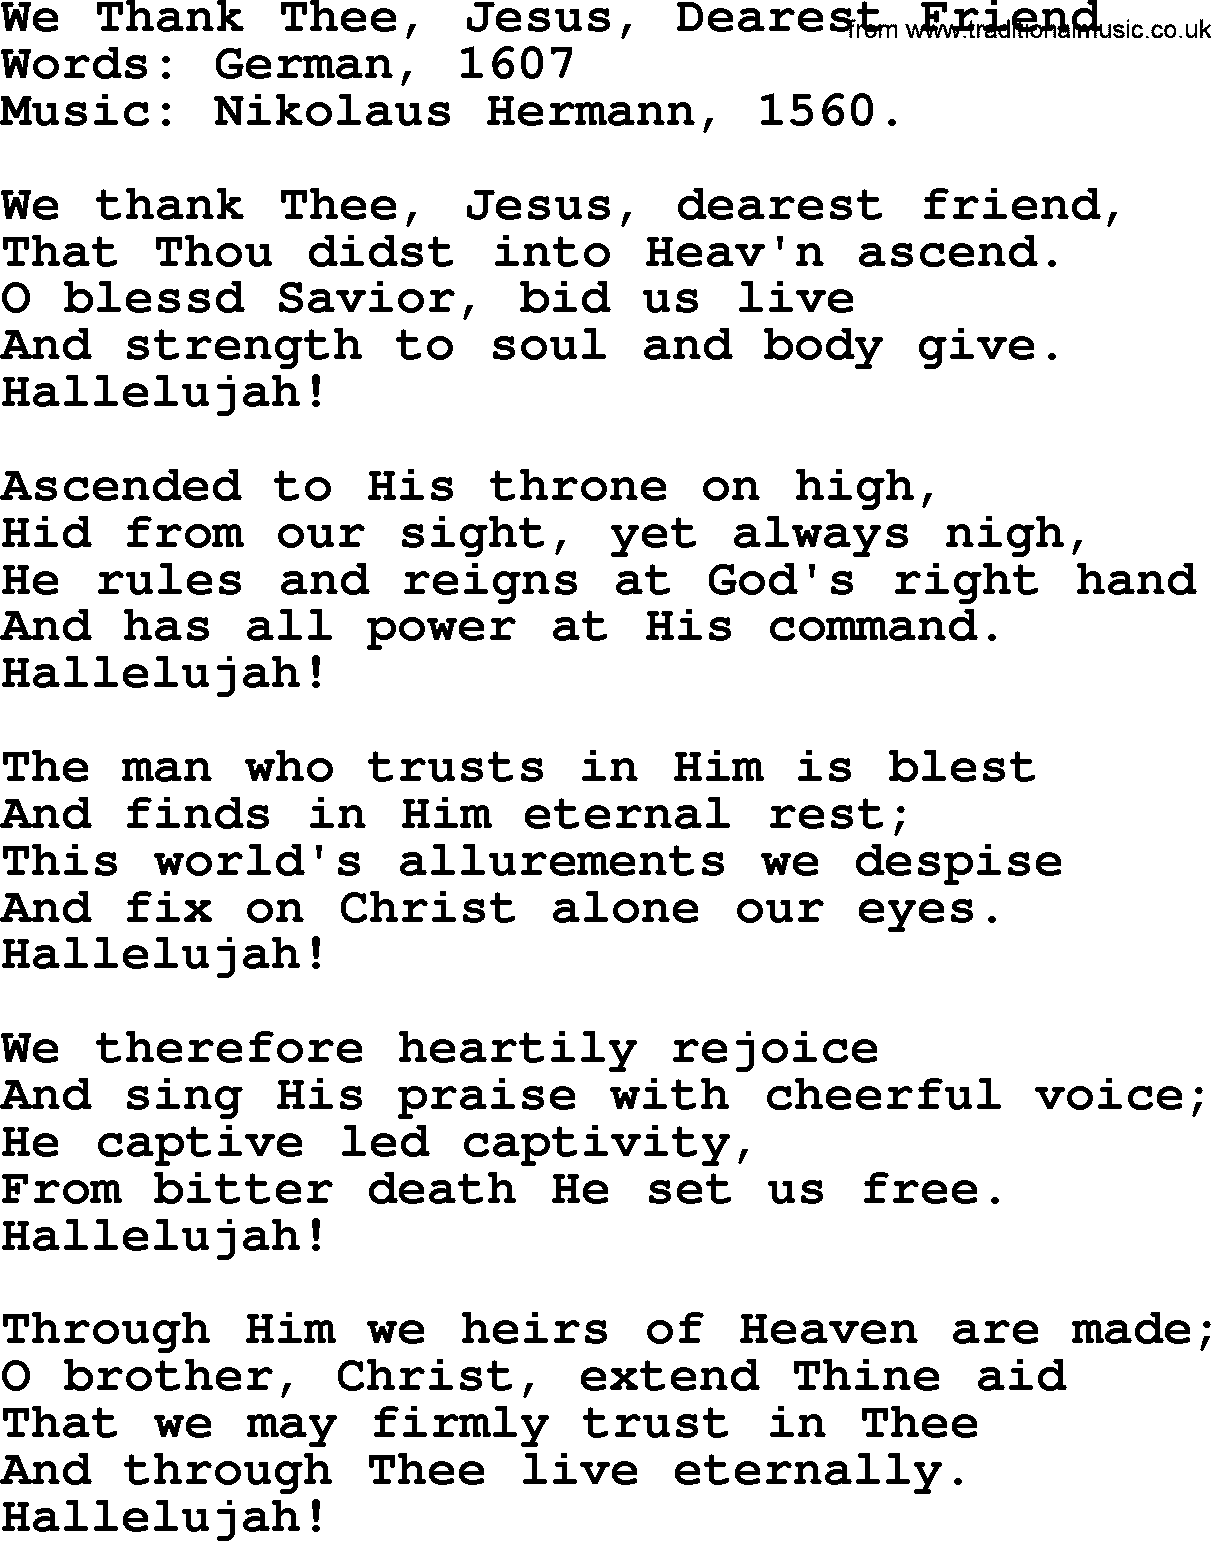 Ascensiontide Hynms collection, Hymn: We Thank Thee, Jesus, Dearest Friend, lyrics and PDF